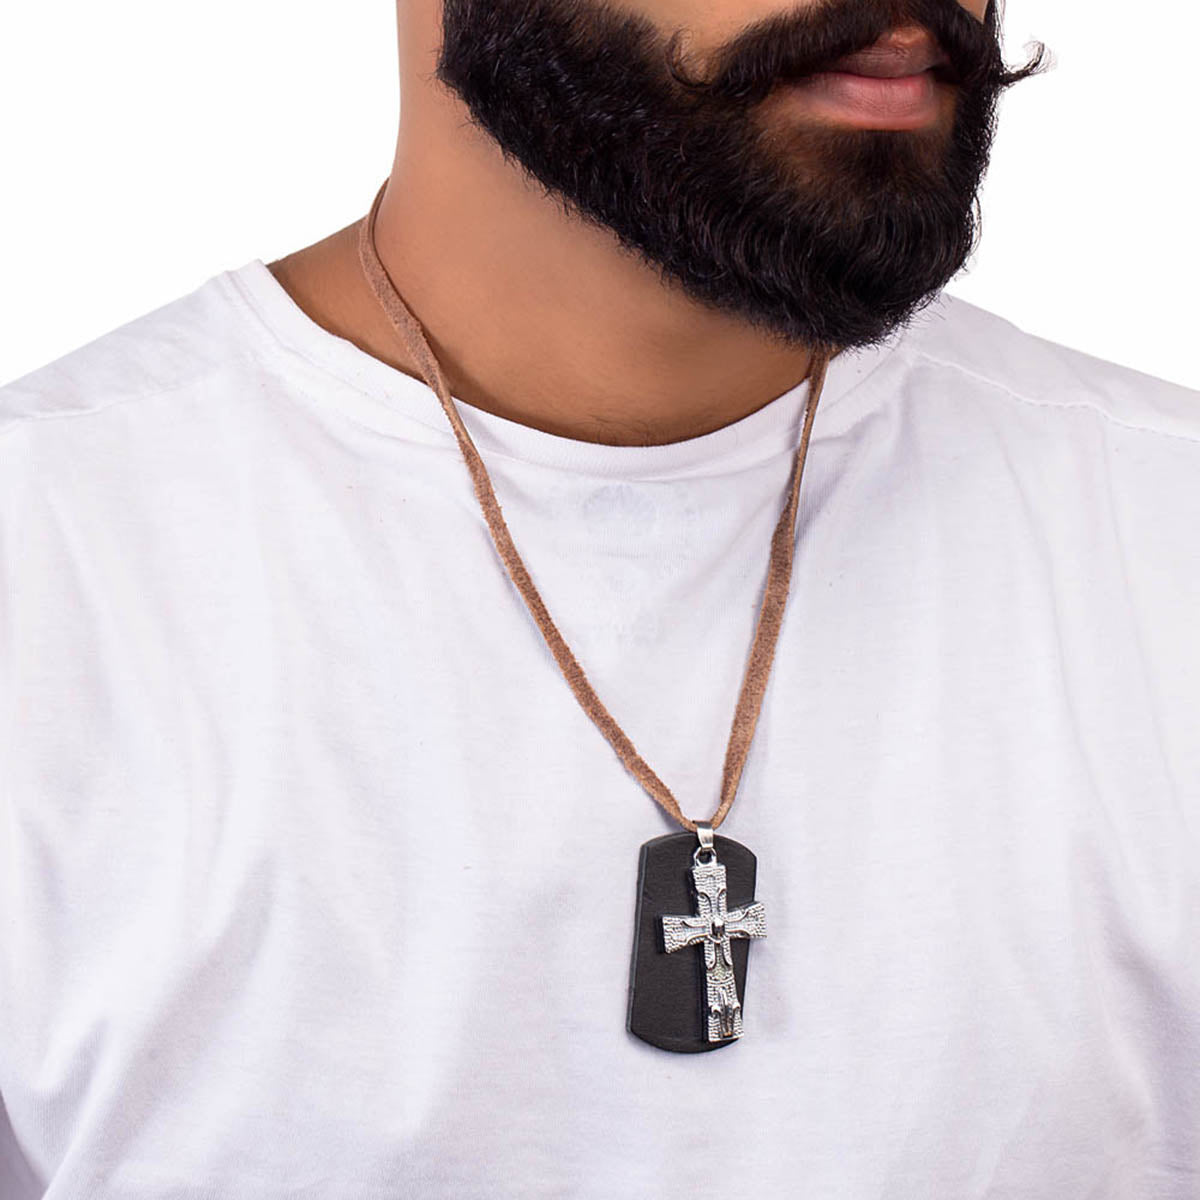 INRI Crucifix Jesus Cross Necklace for Men Women Wooden Religious Catholic Pendant  Necklaces Leather Rope Chains Jewelry Collier